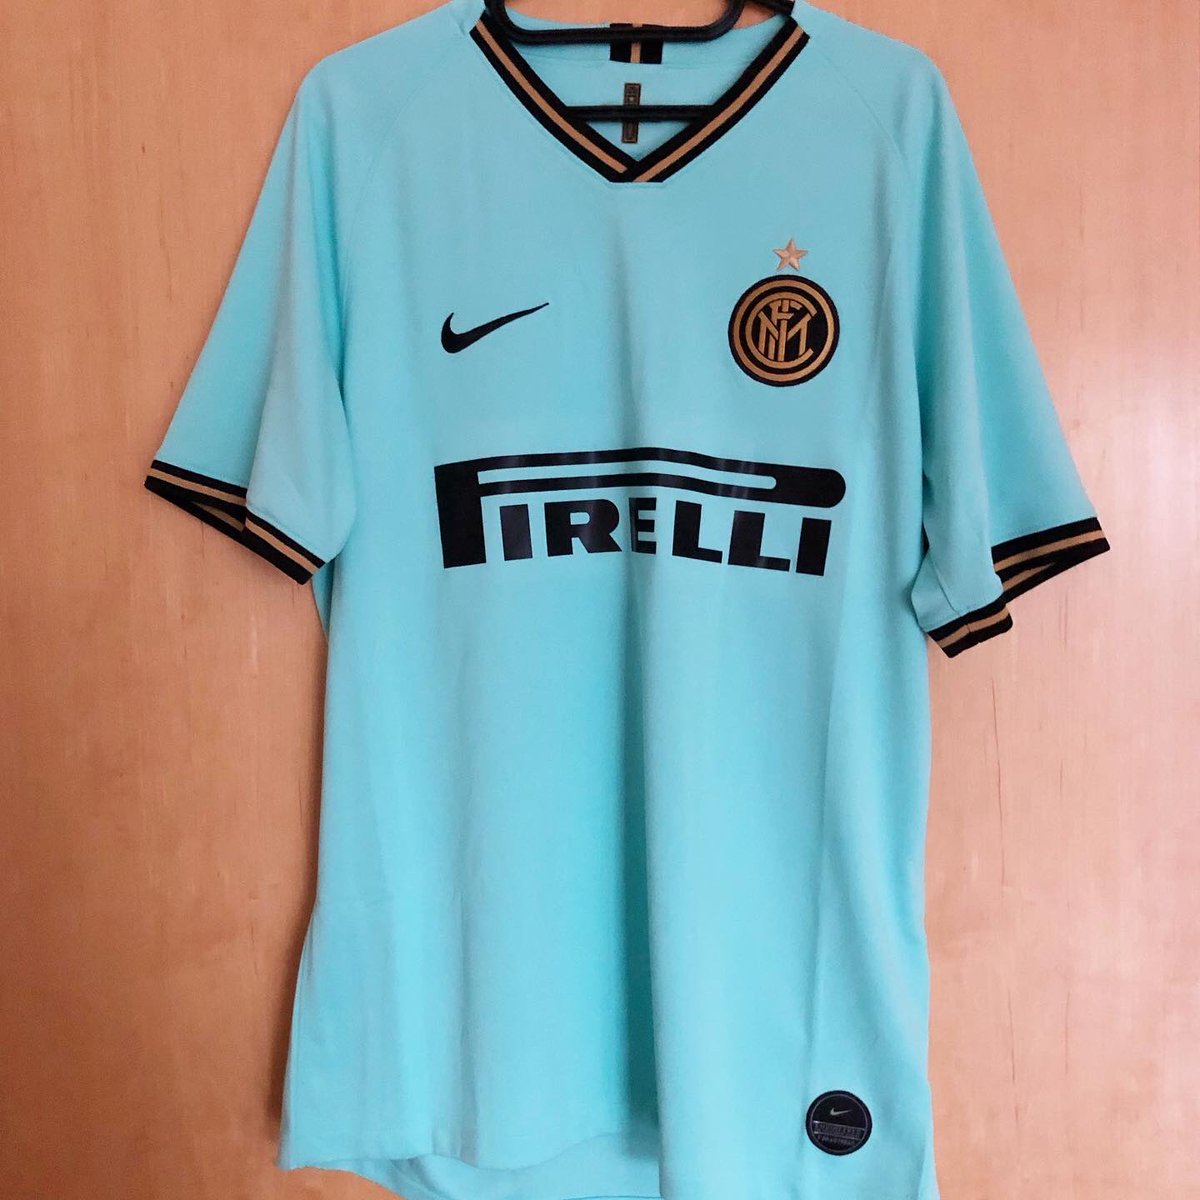  @InterAway Kit, 2019/20NikePersonalised:  @stefanosensi12 It’s an in-or-out kind of night for Inter in the UCL. We need something for good luck. Today’s choice is a stunner, Inter’s best shirt of the past few seasons, a wonderful gift from my friends Gianni and Giulia